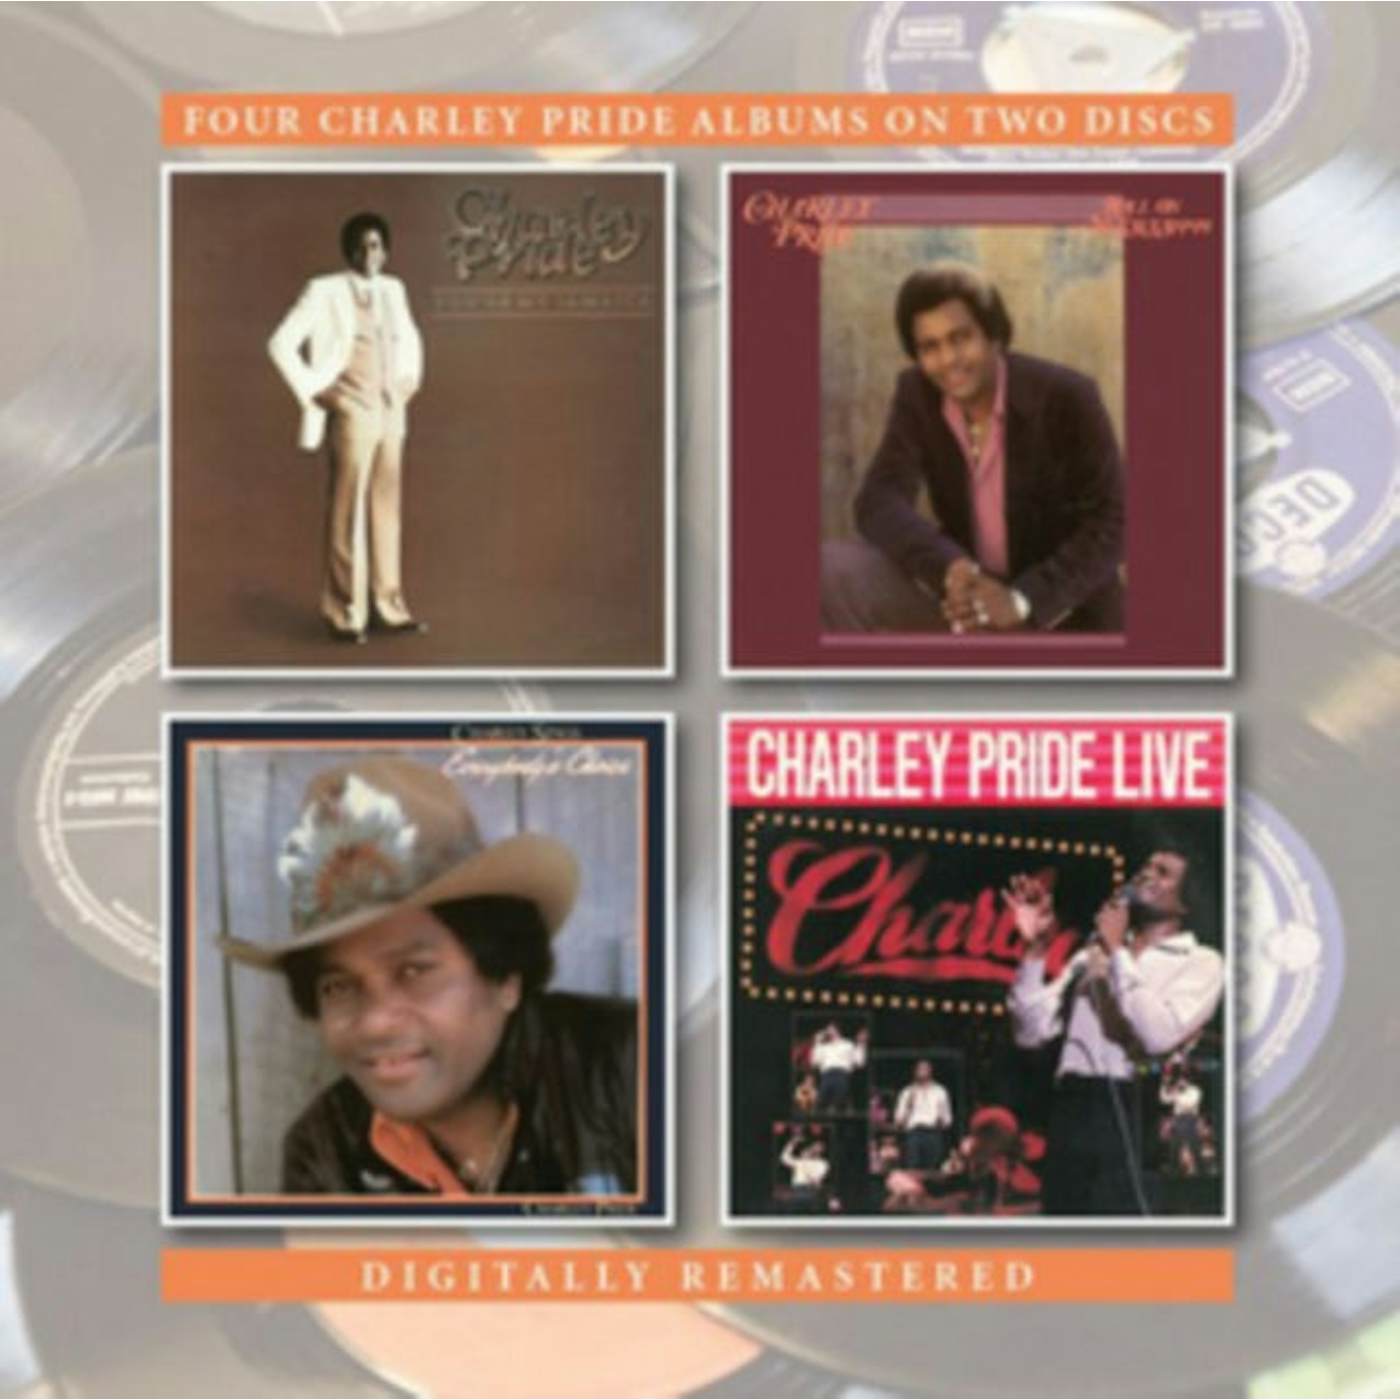 Charley Pride CD - You're My Jamaica / Roll On Mississippi / Charley Sings Everybody